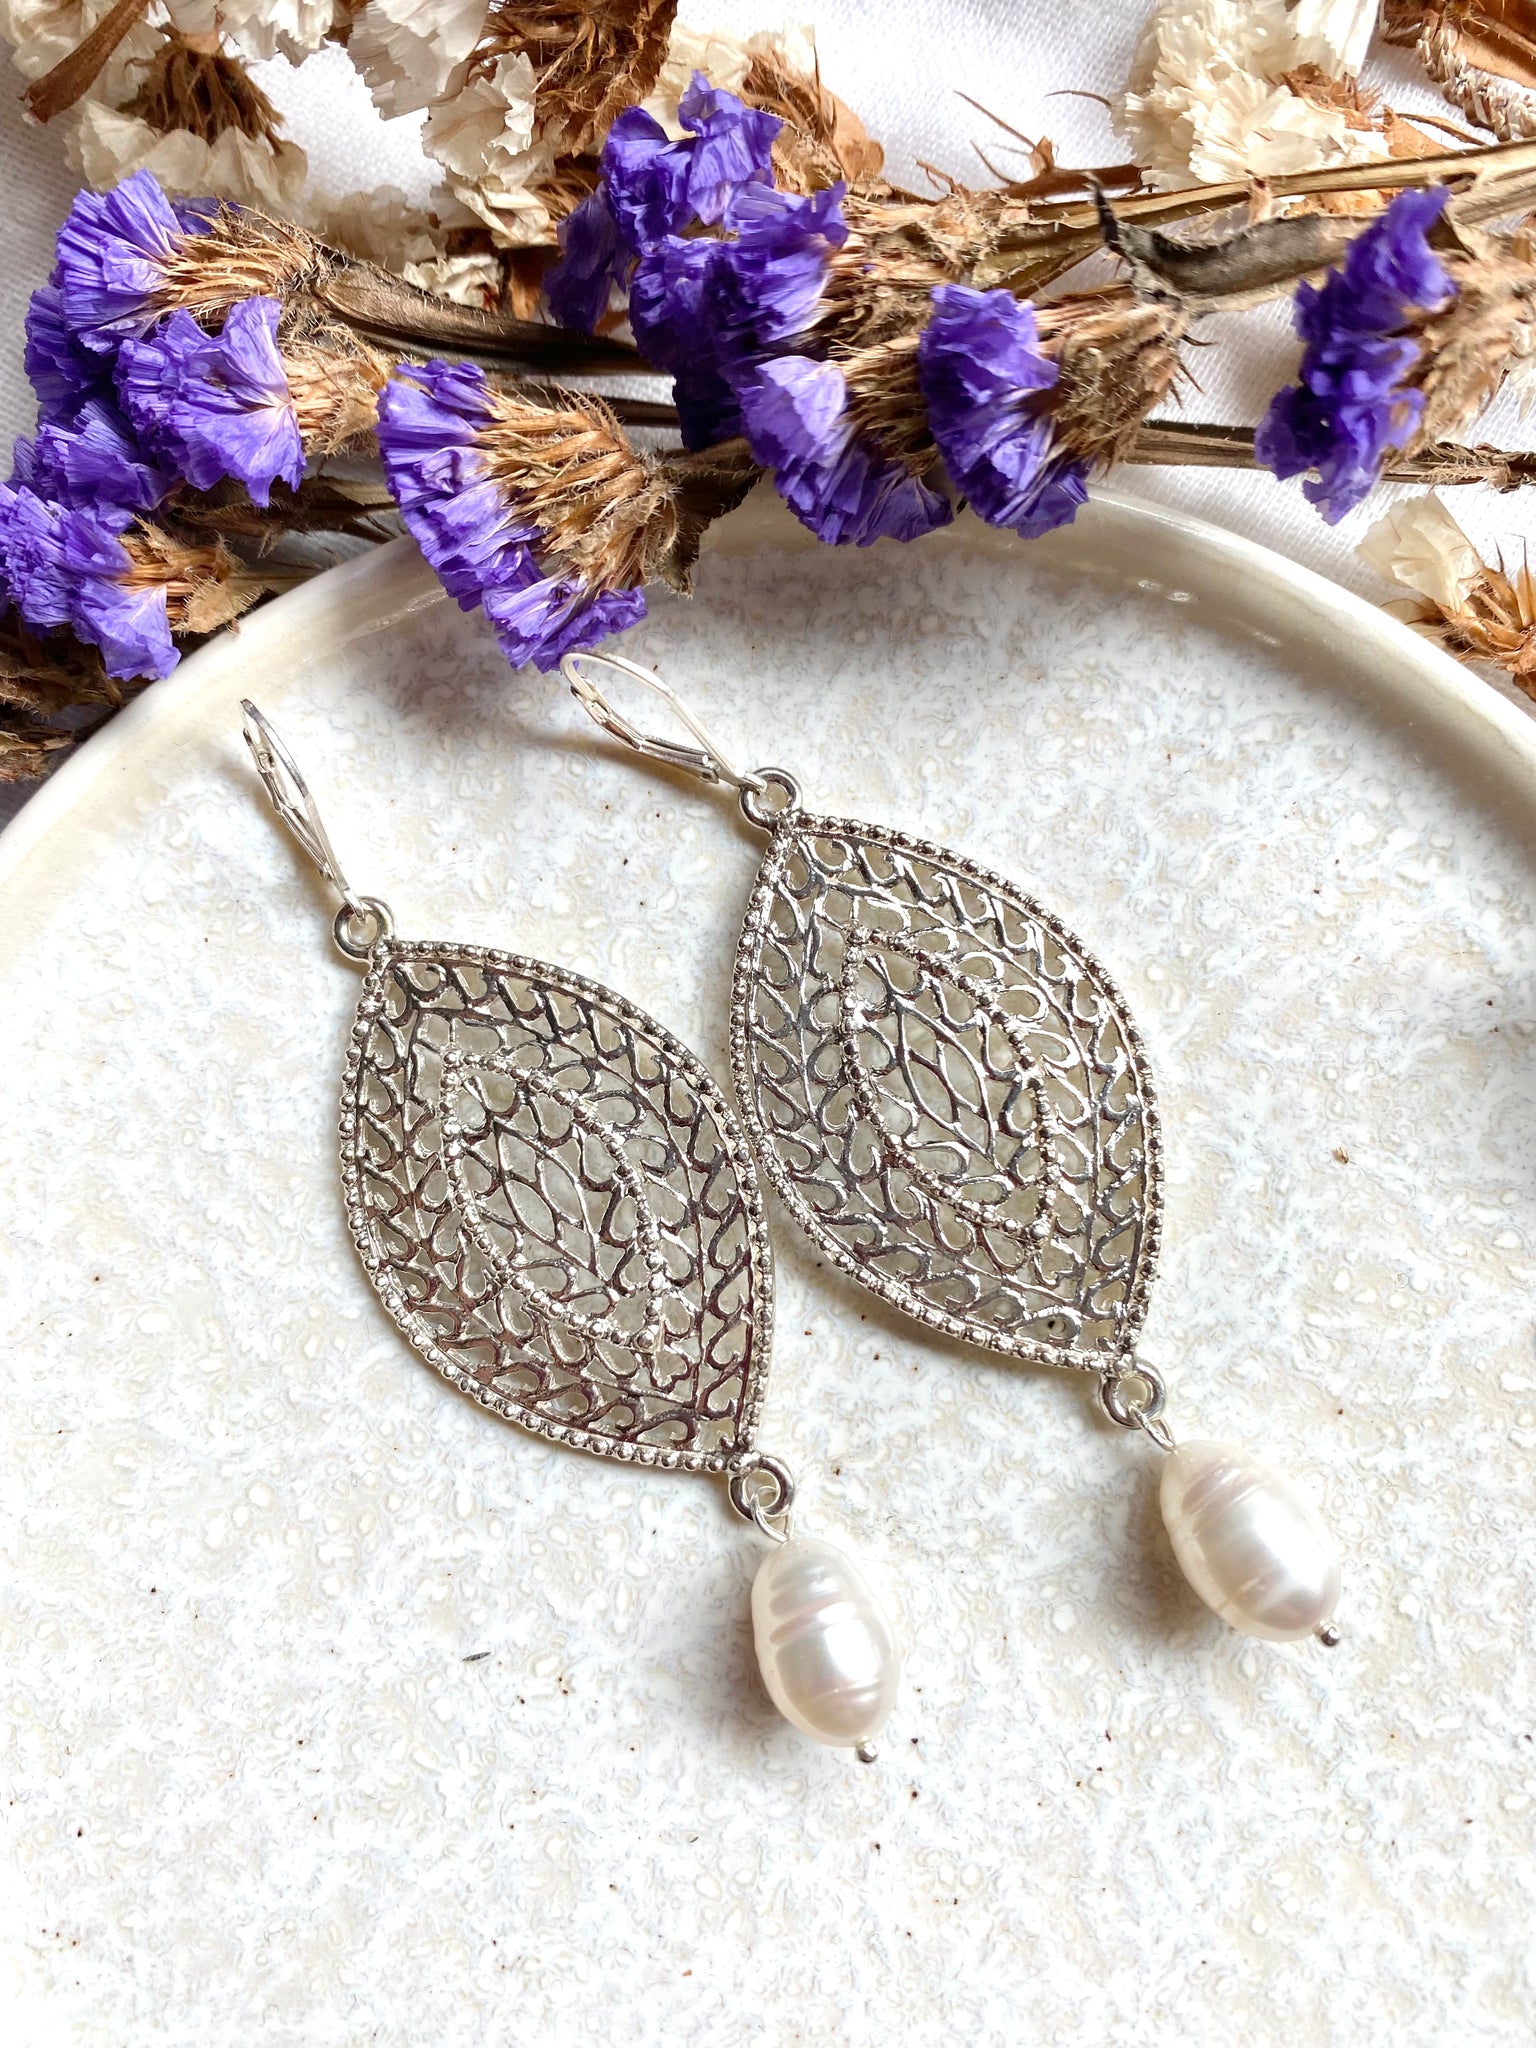 SOLD - On Sale - New long filigree white Pearl earring